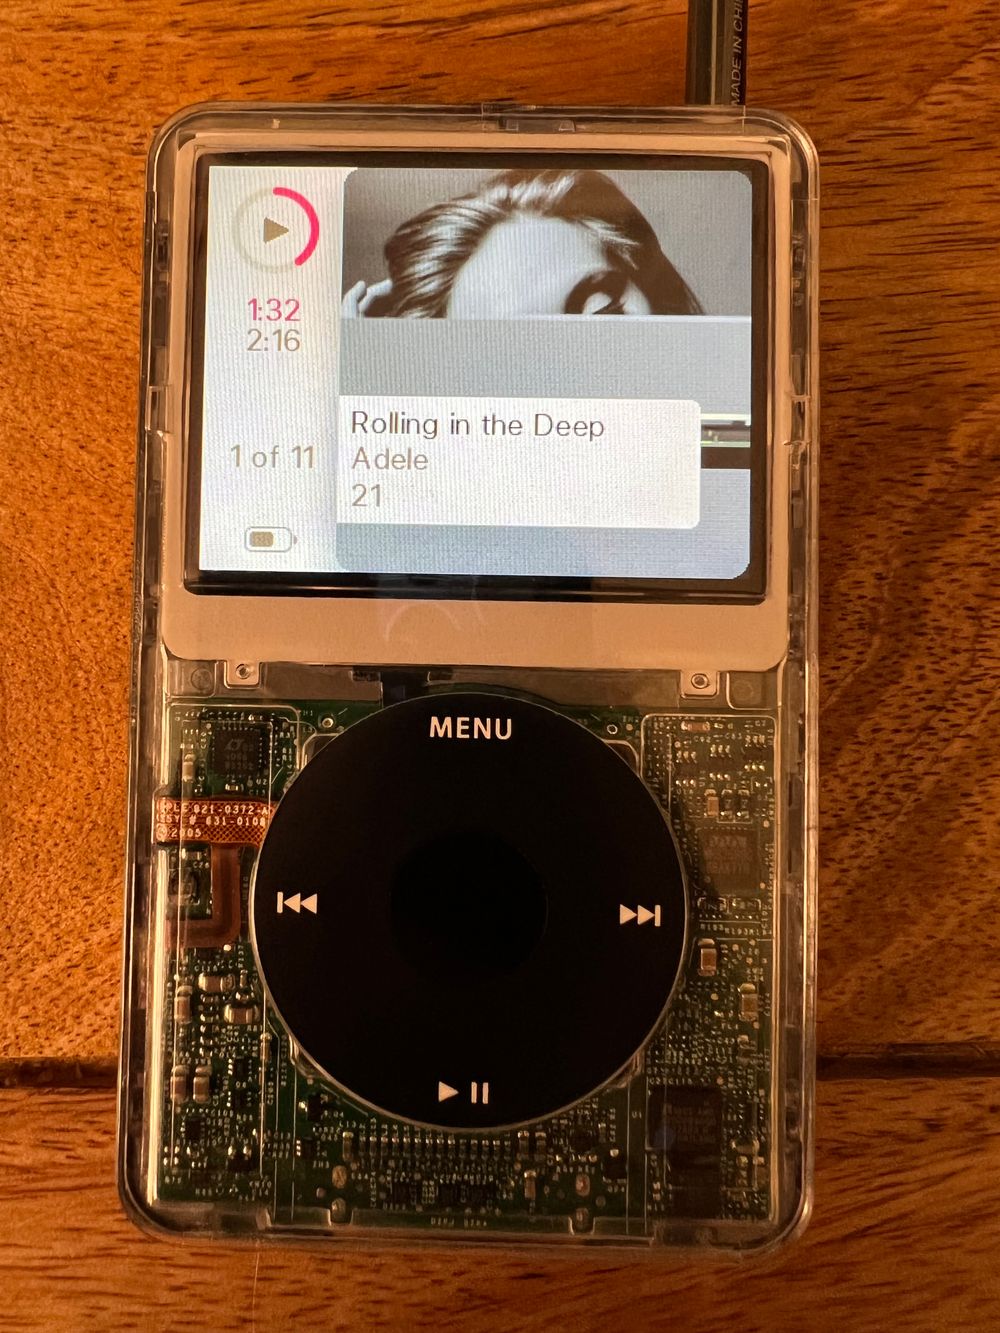 A Software Engineer Upgraded an Old iPod for 2022